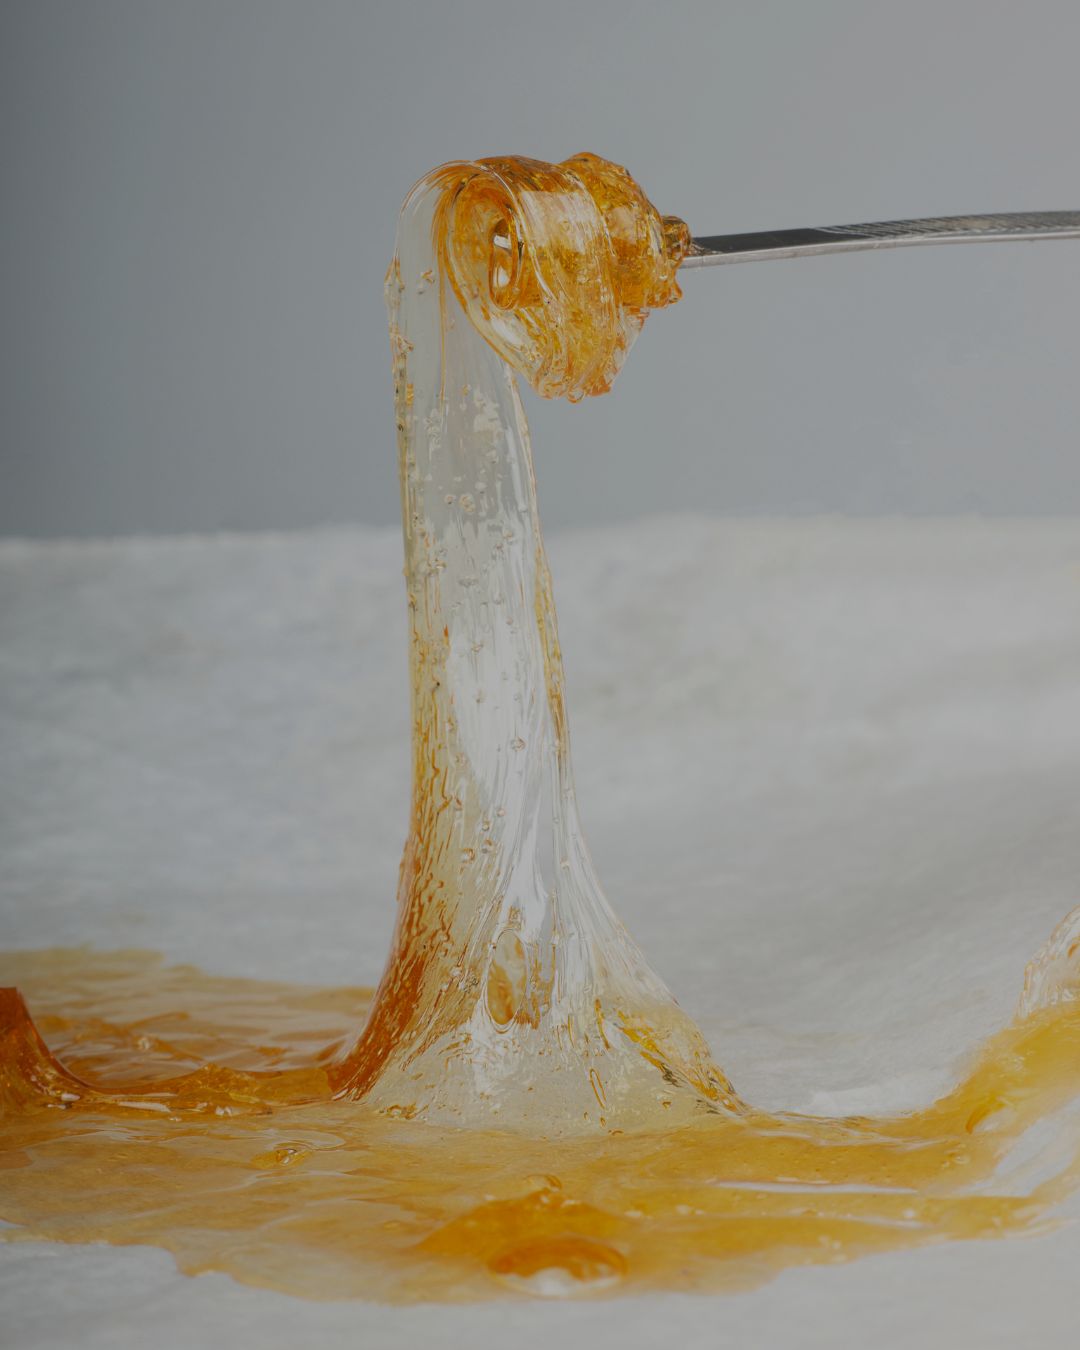 What are cannabis concentrates